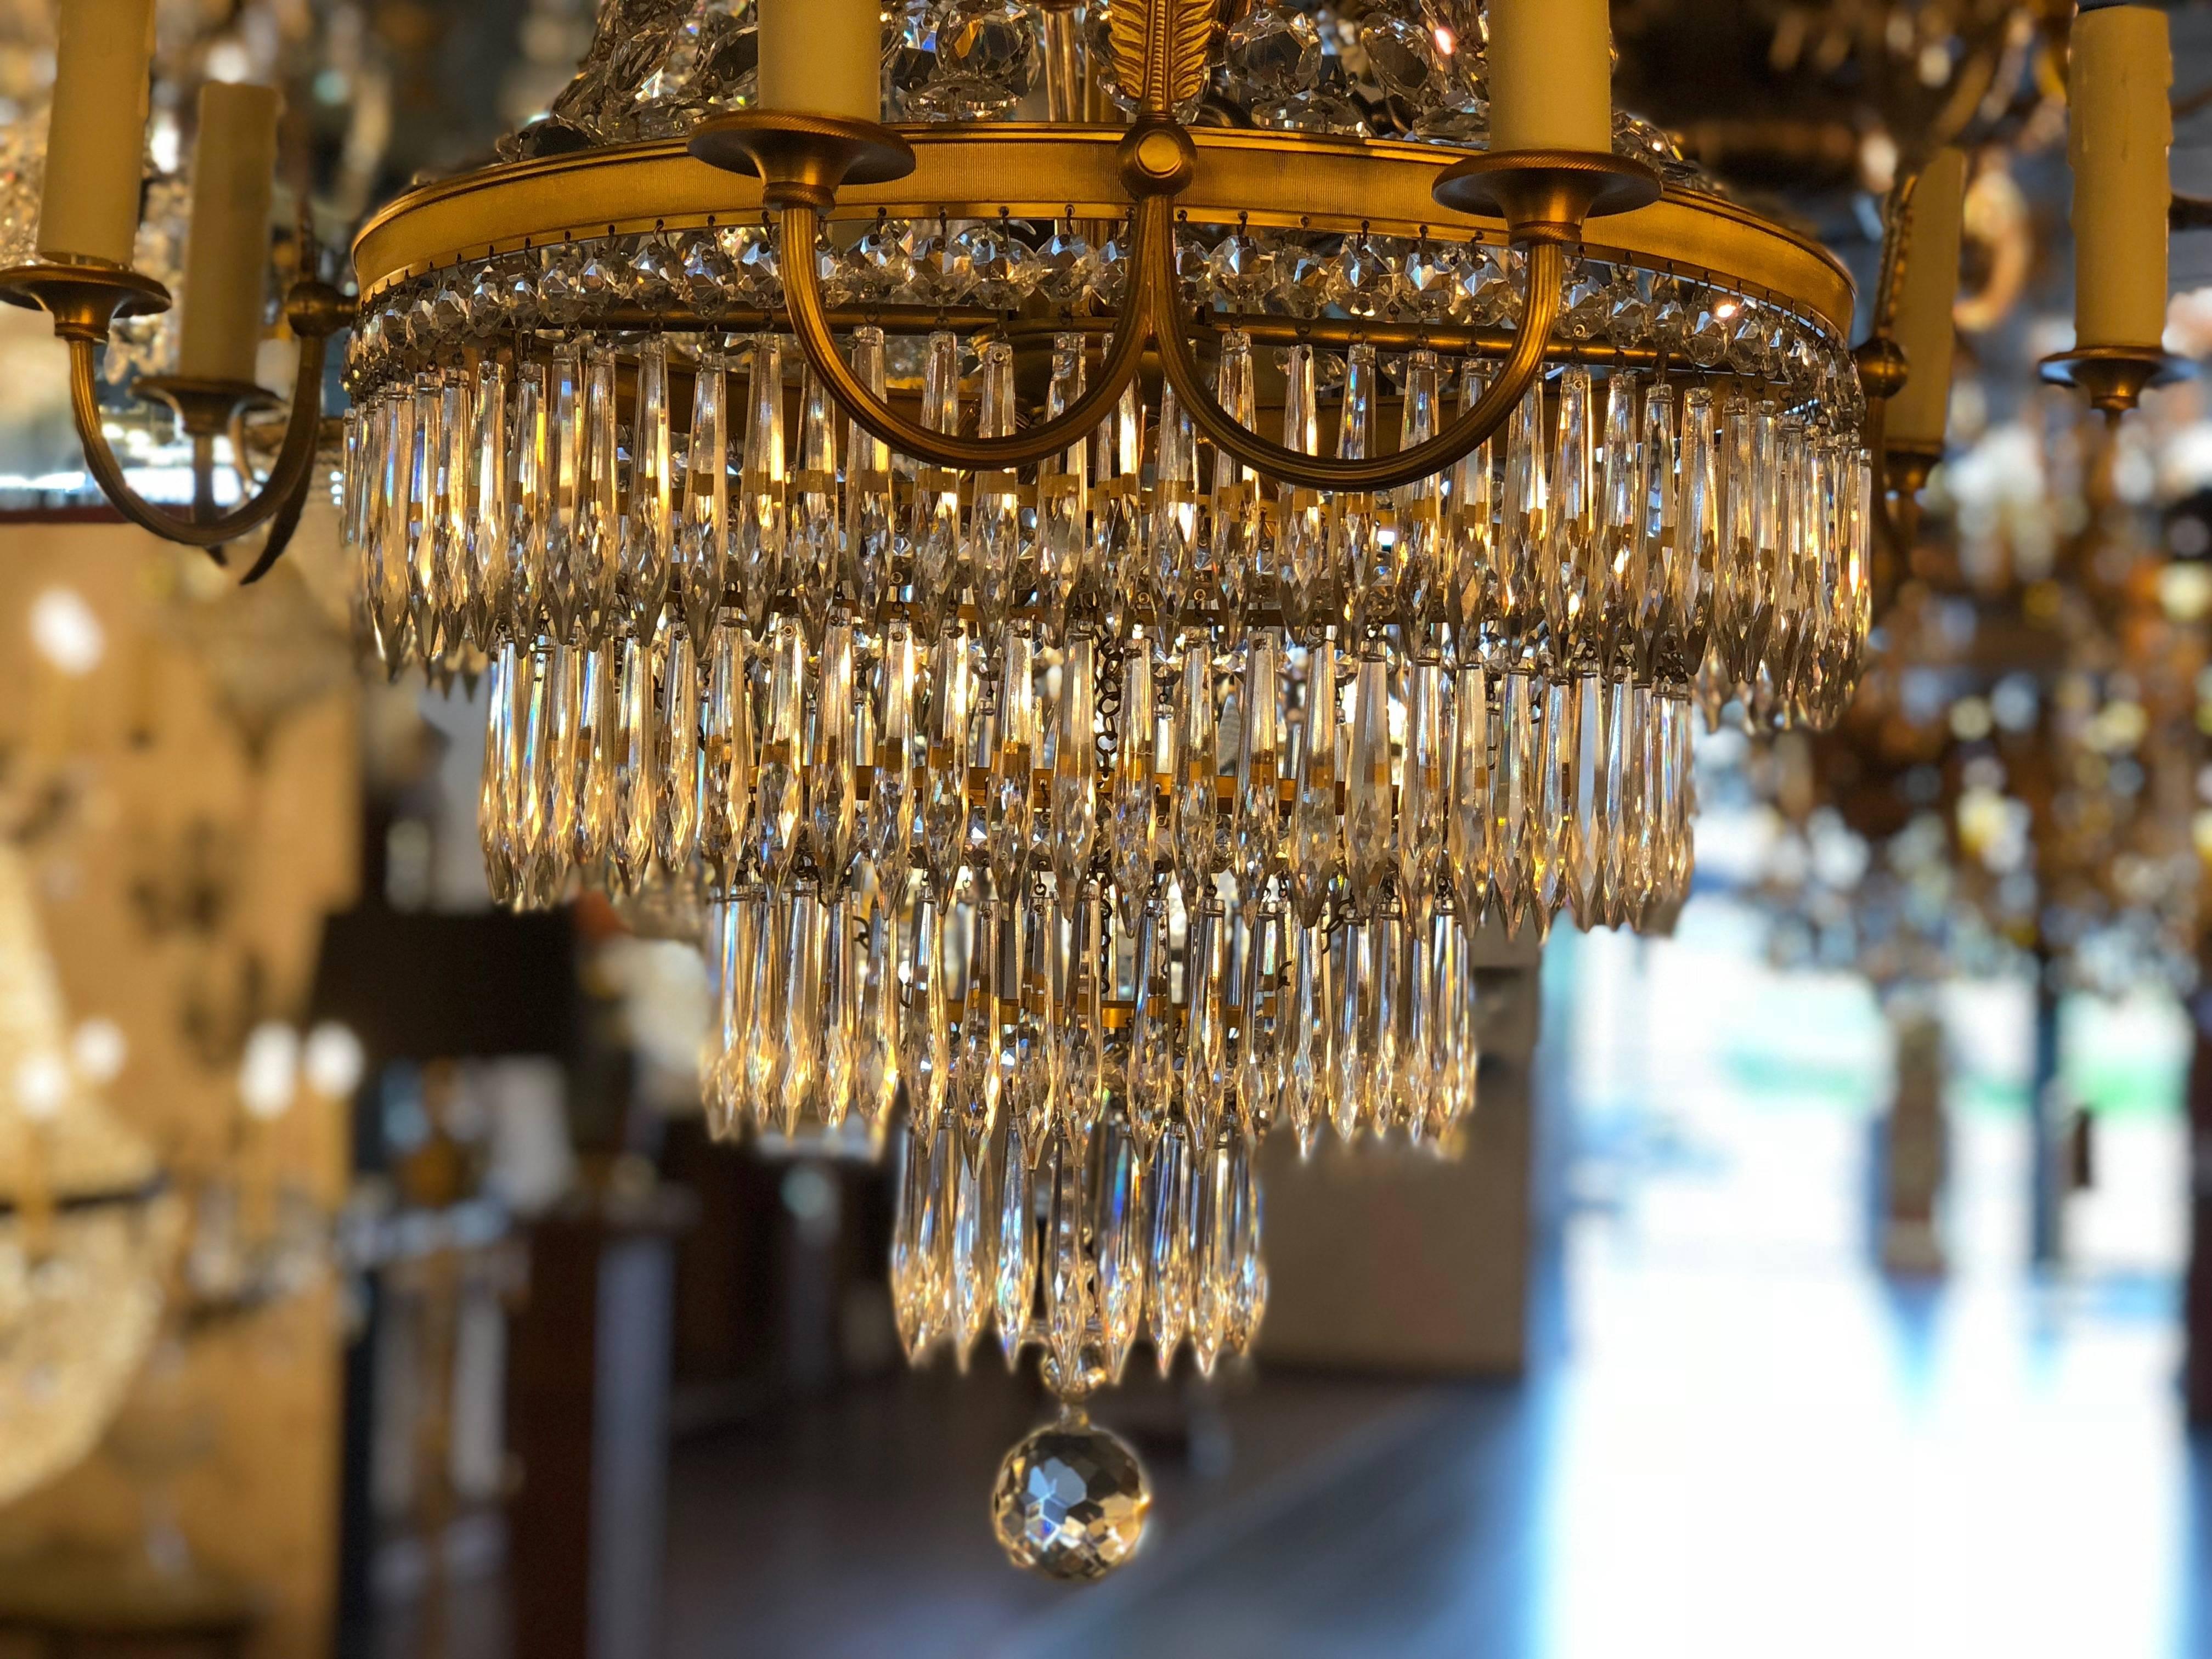 20th Century French Second Empire Gilt Bronze Chandelier with 4 x 2 Arms For Sale